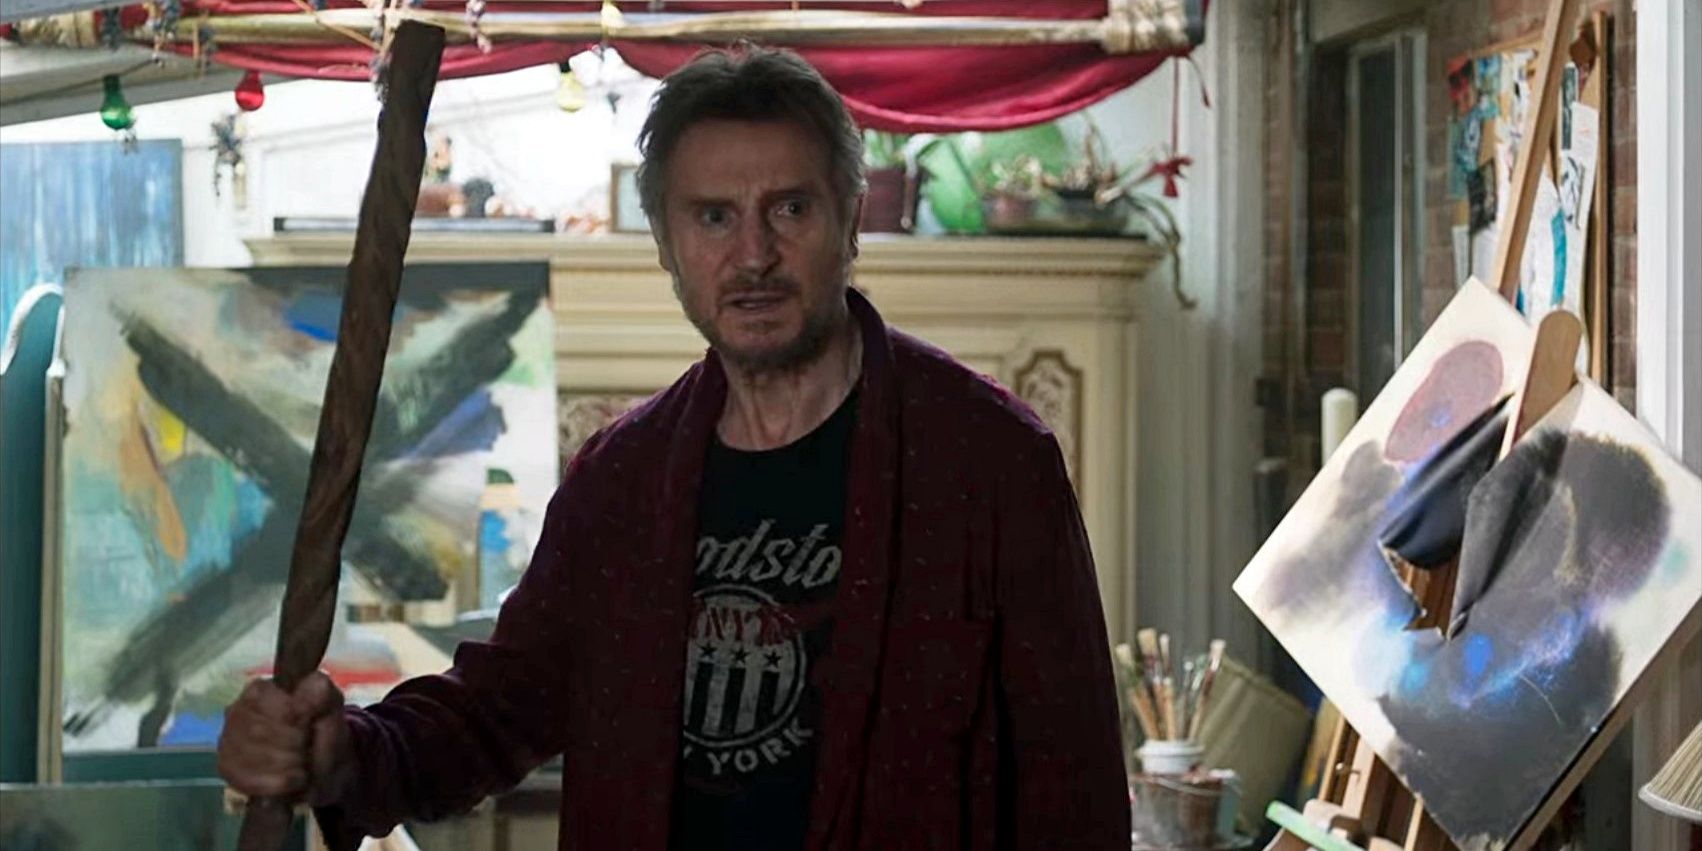 Liam Neeson as Robert Foster in Made in Italy.